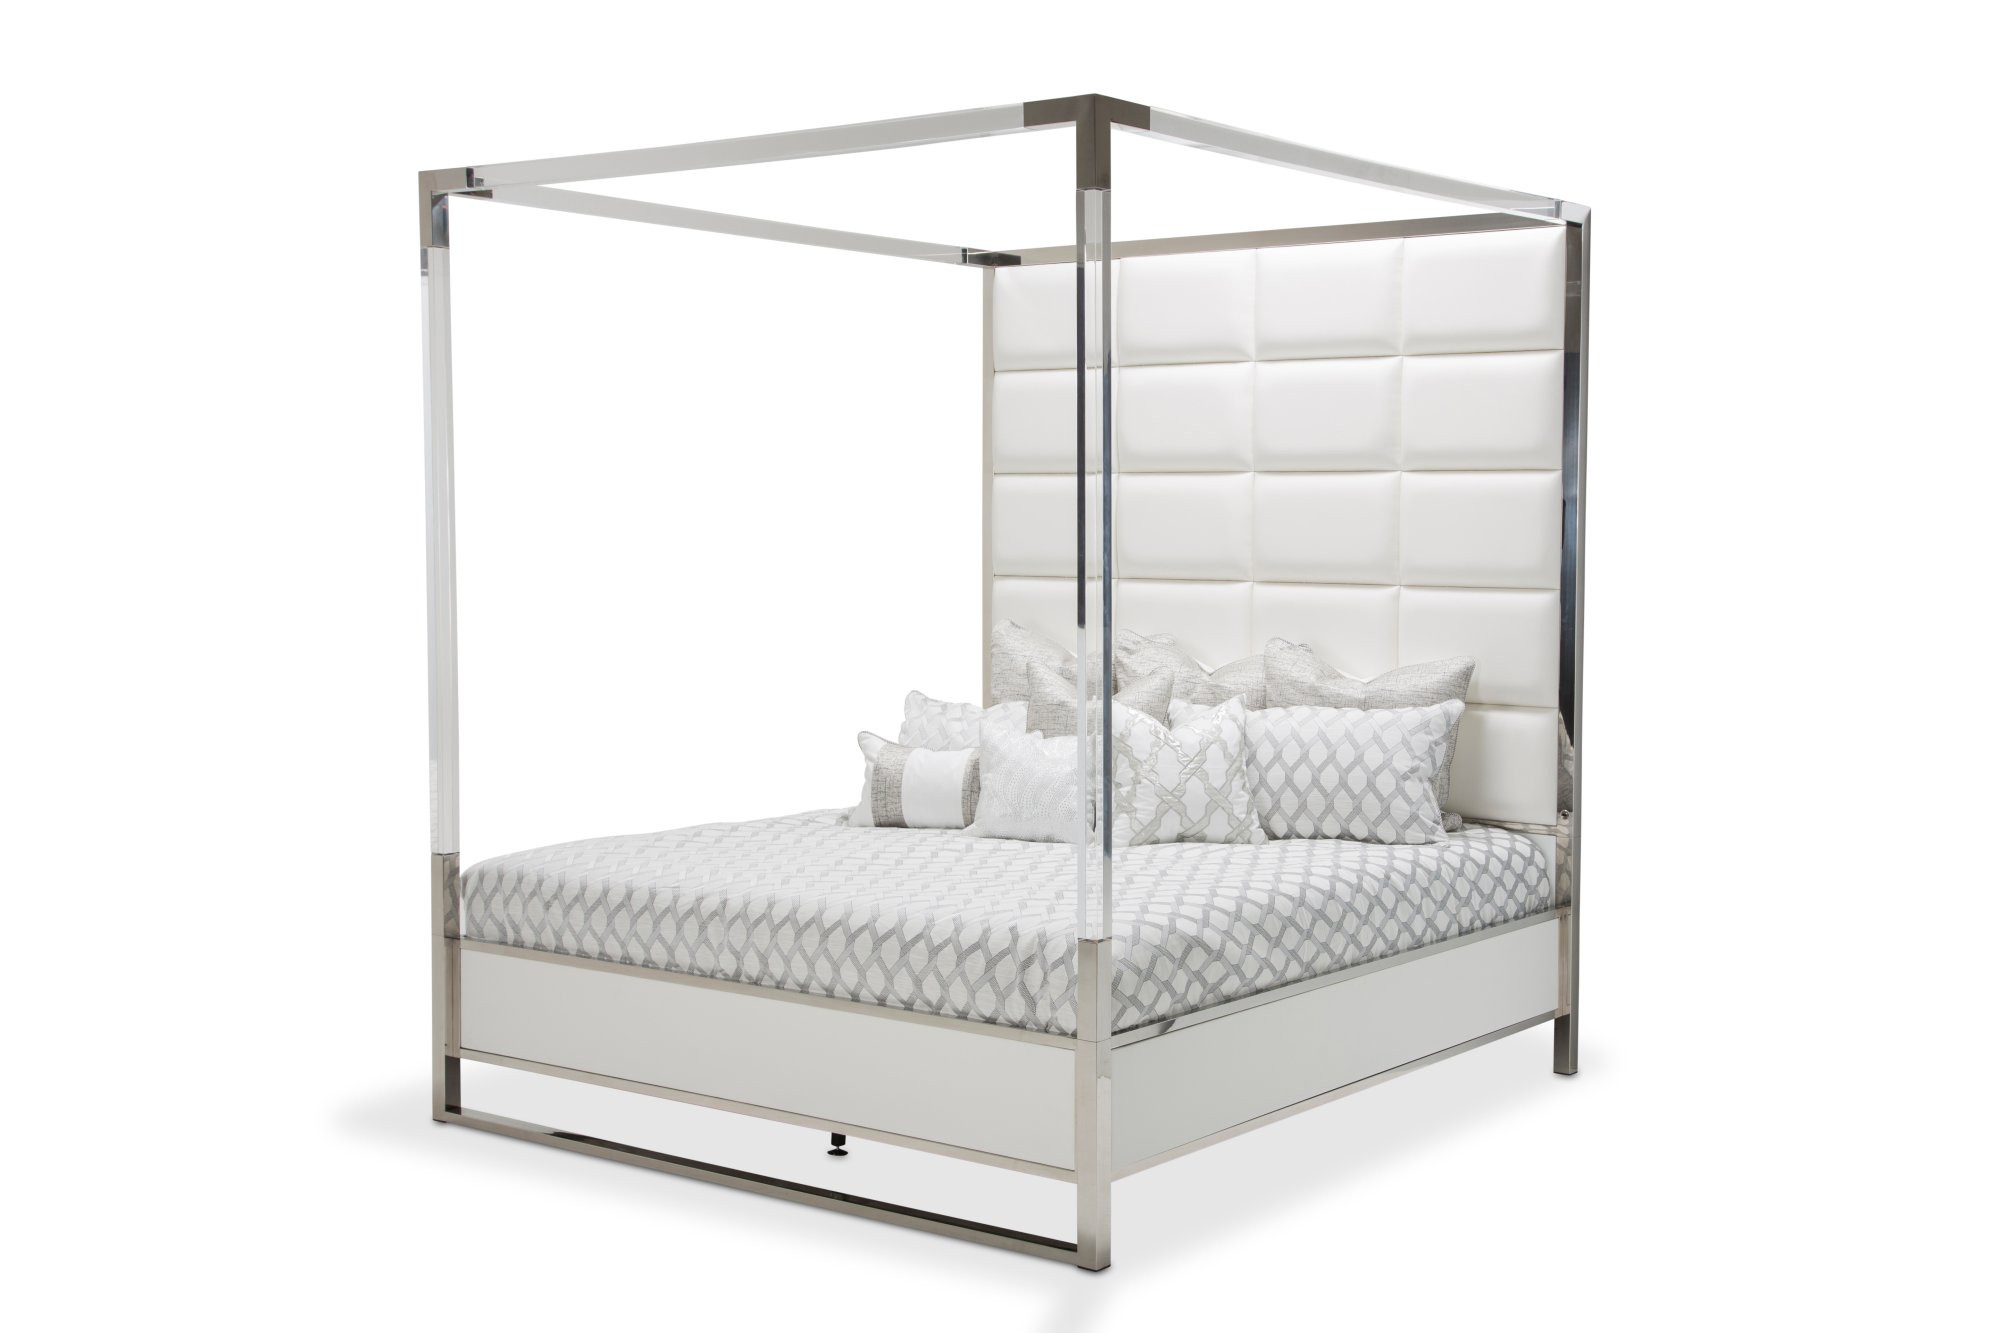 Cal King Metal Canopy Bed State, Black King Canopy Bed